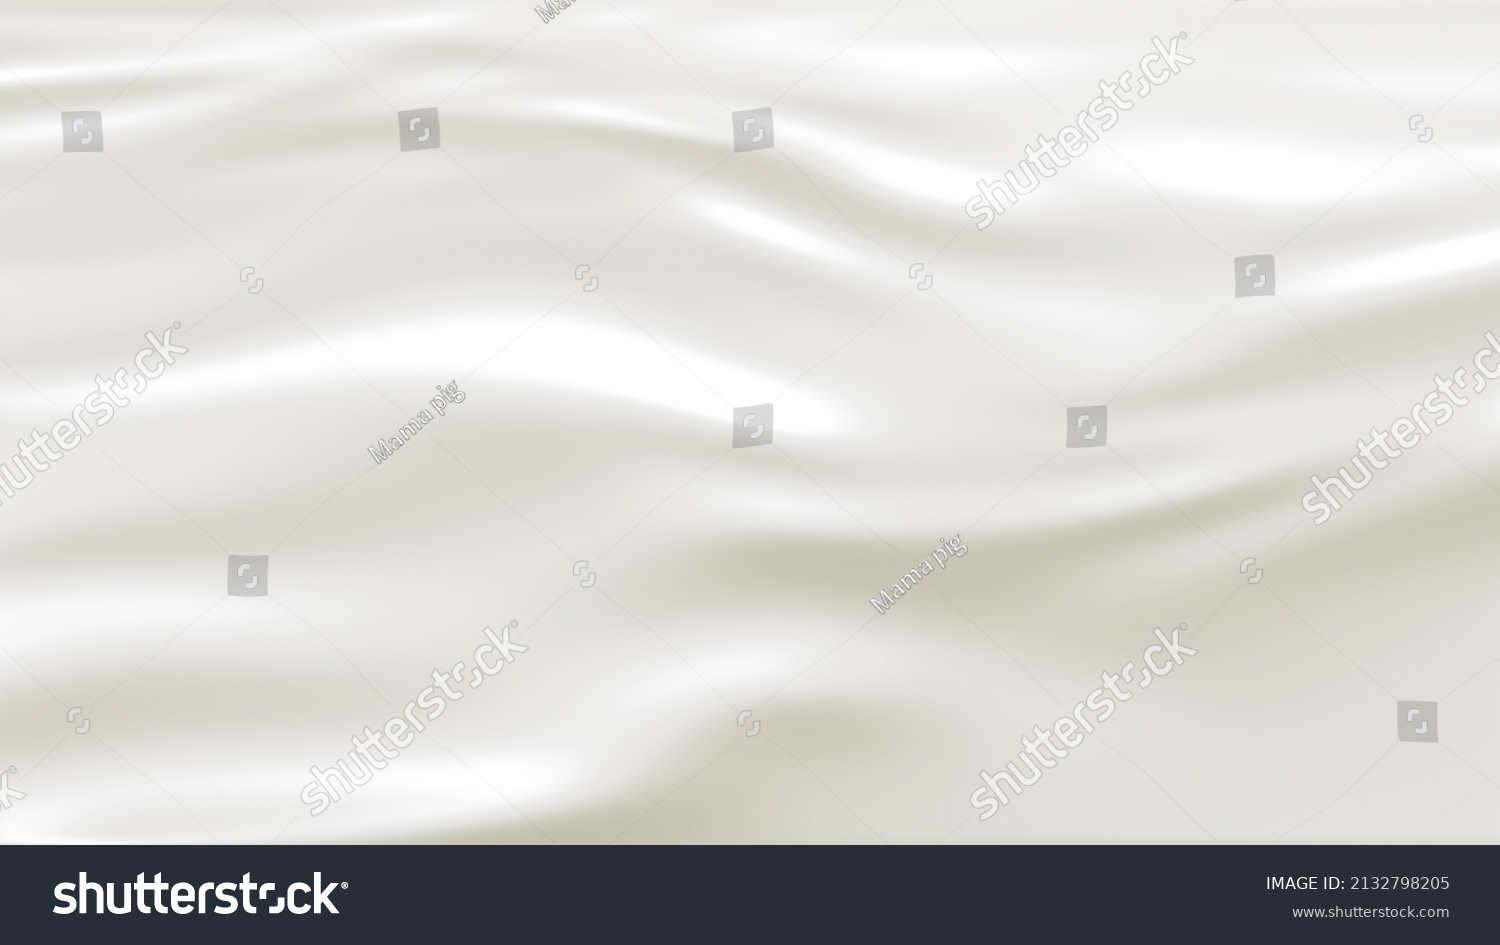  Milk liquid white color drink and food texture background.  #2132798205